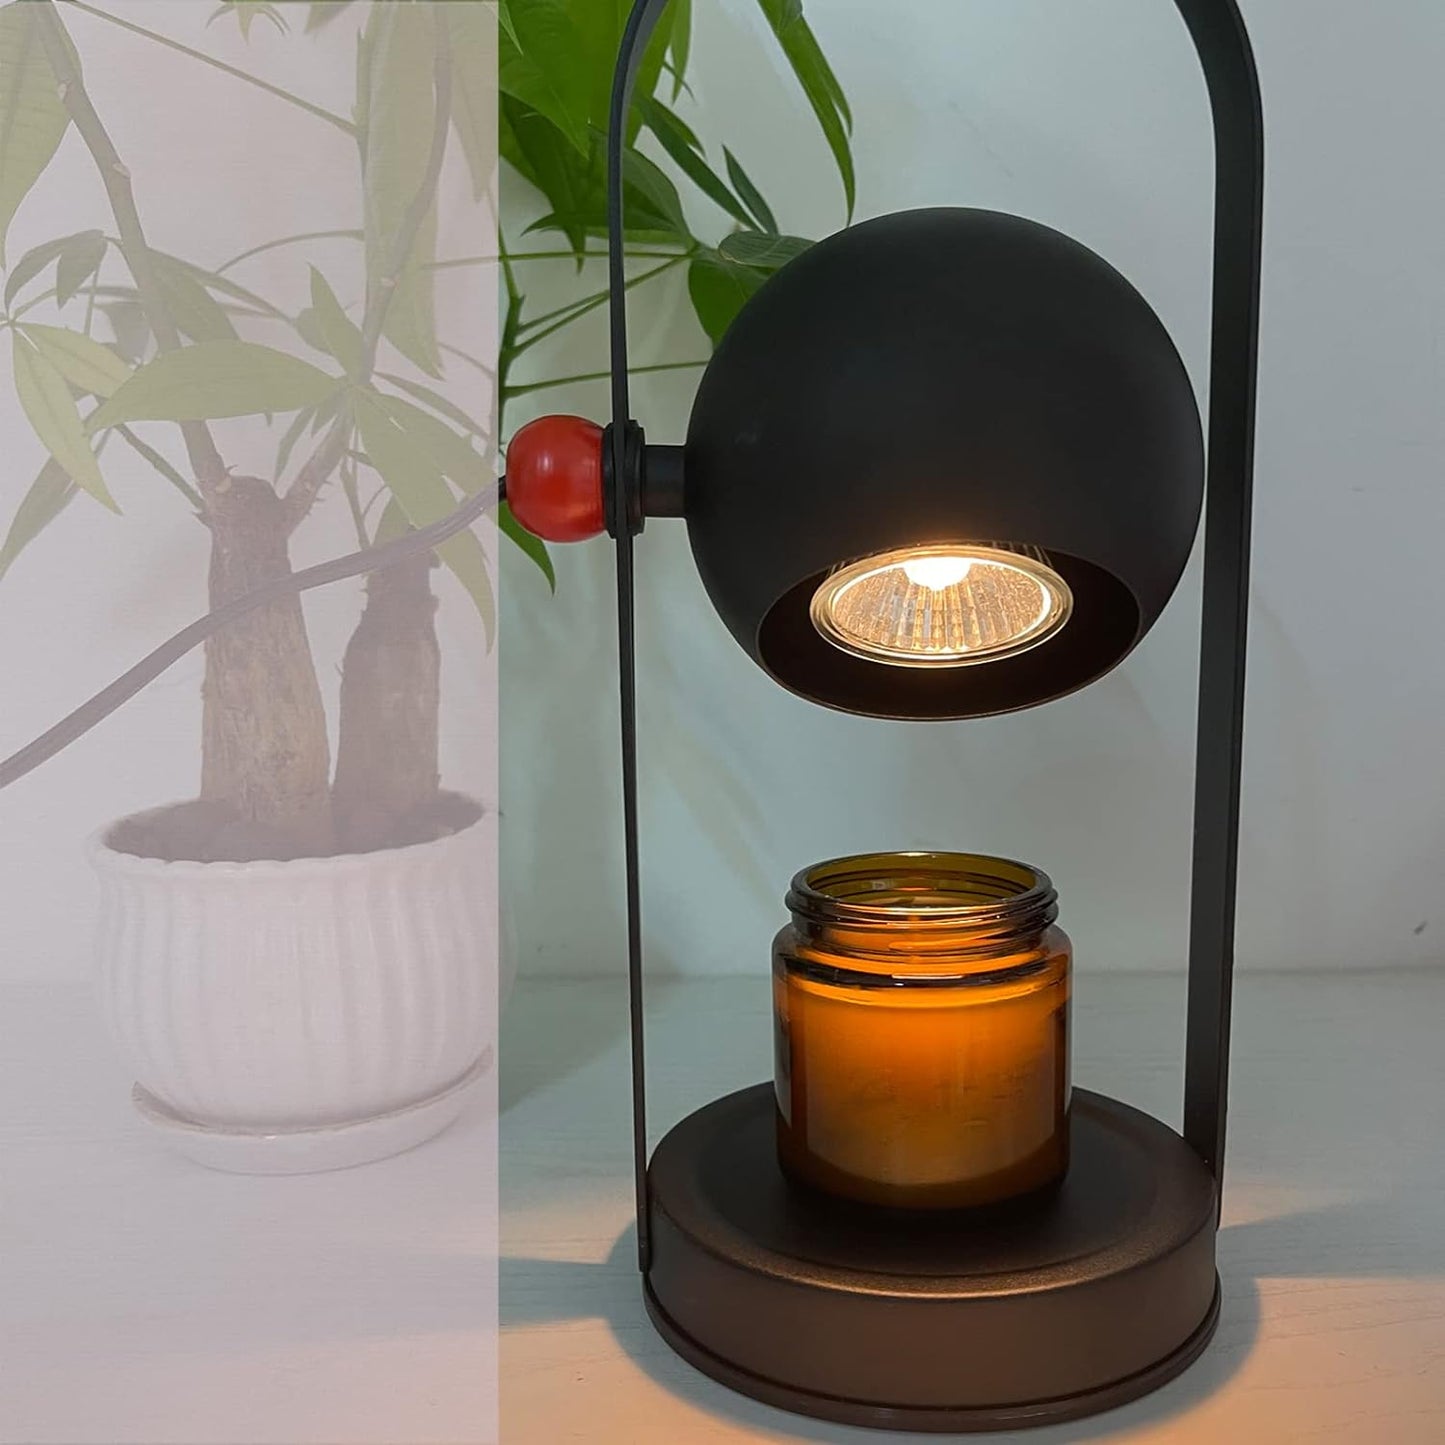 Candle Warmer Lamp with Timer, Dimmable Candle Lamp Warmer Electric Candle Warmer Compatible with Small and Large Scented Candles, Candle Melter for Bedroom Home Decor Gifts for Mom